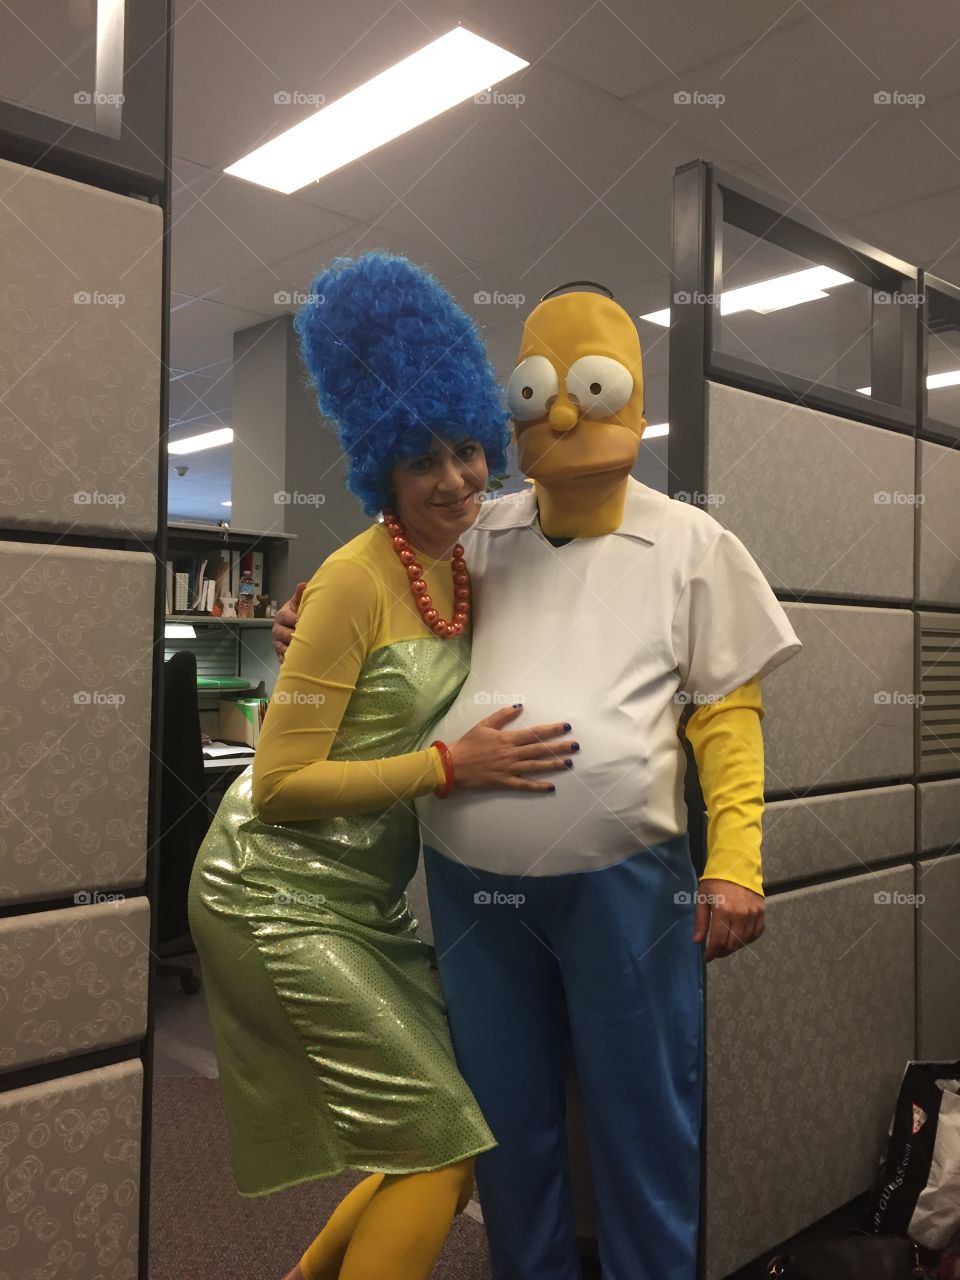 homer and Marg Simpson Halloween costumes 